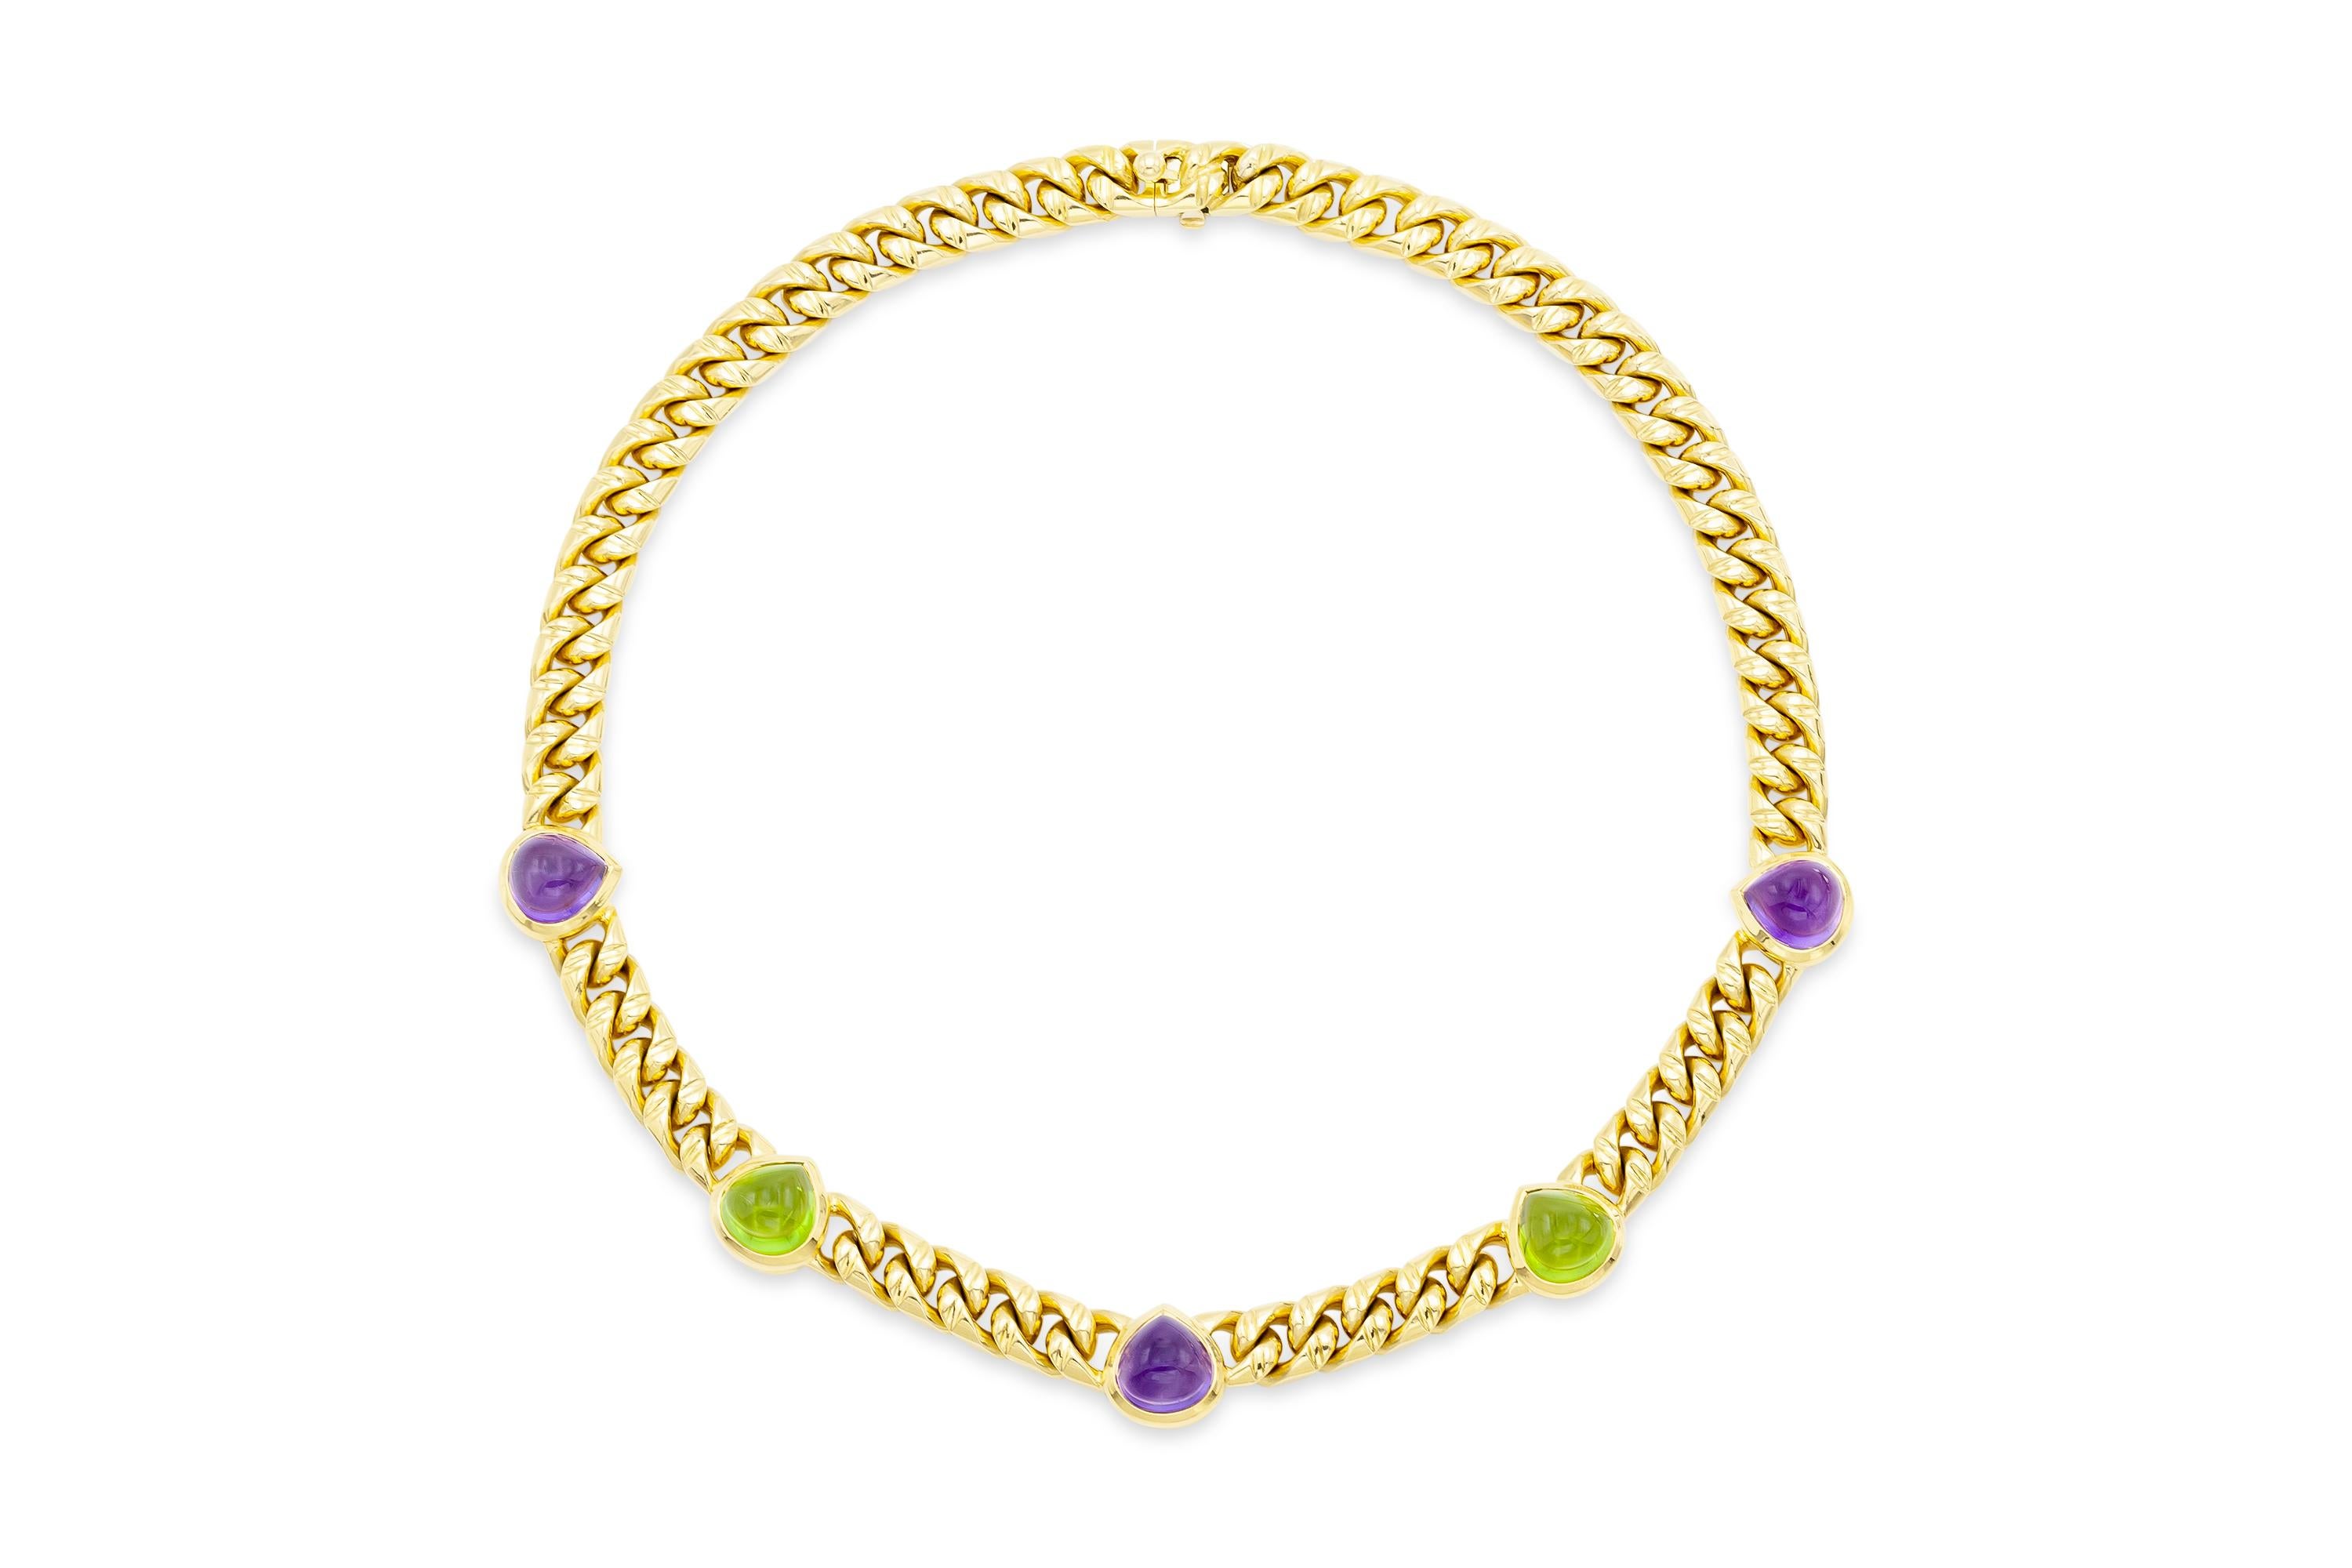 Finely crafted in 18k yellow gold with Cabochon Amethyst and Tourmaline droplets.
Signed by Bvlgari
14 1/2